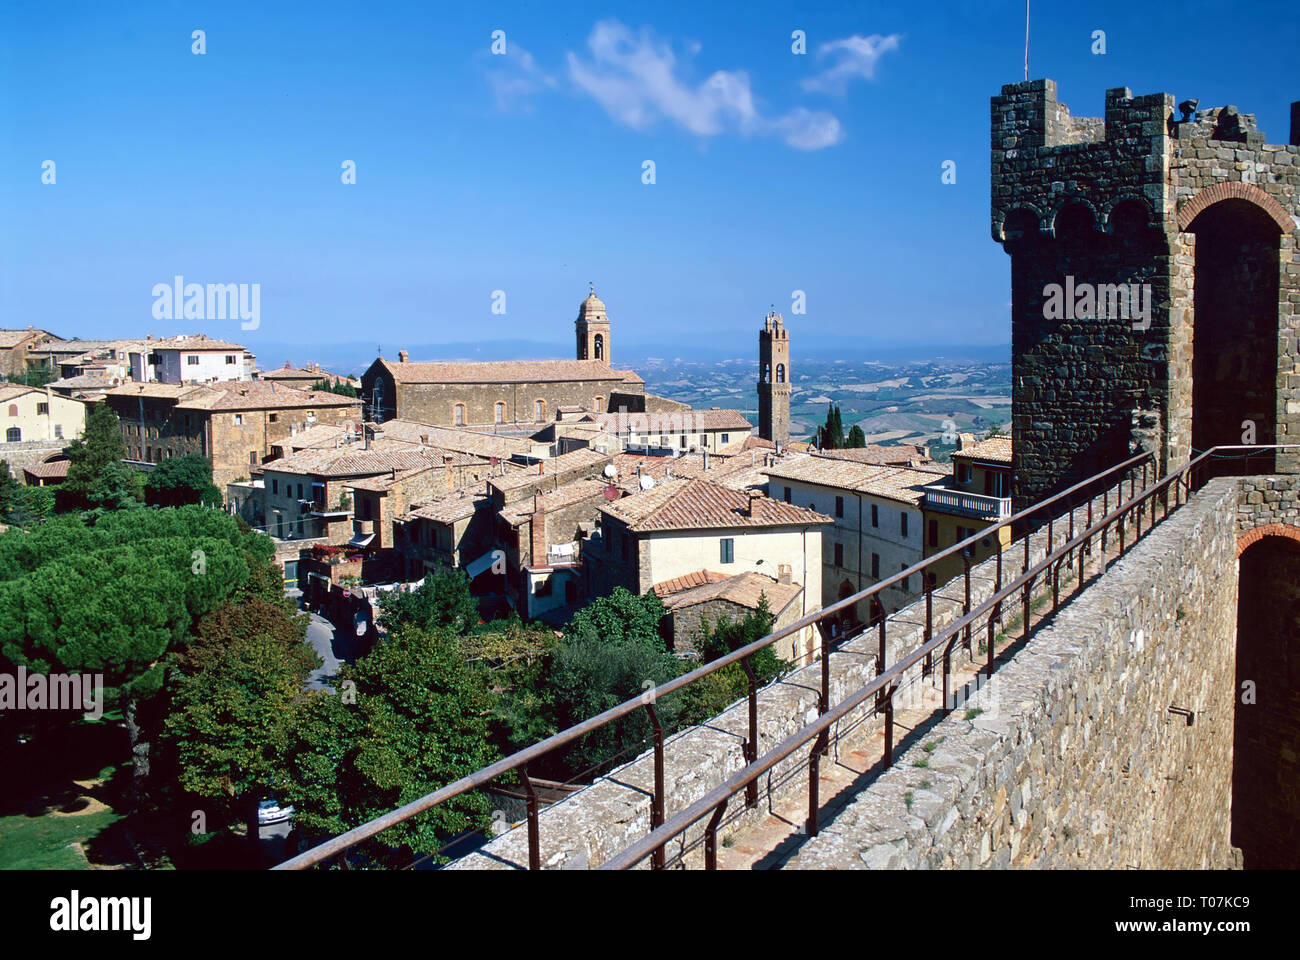 View of Montalcino from walls of the Fortezza,Tuscany,Italy Stock Photo